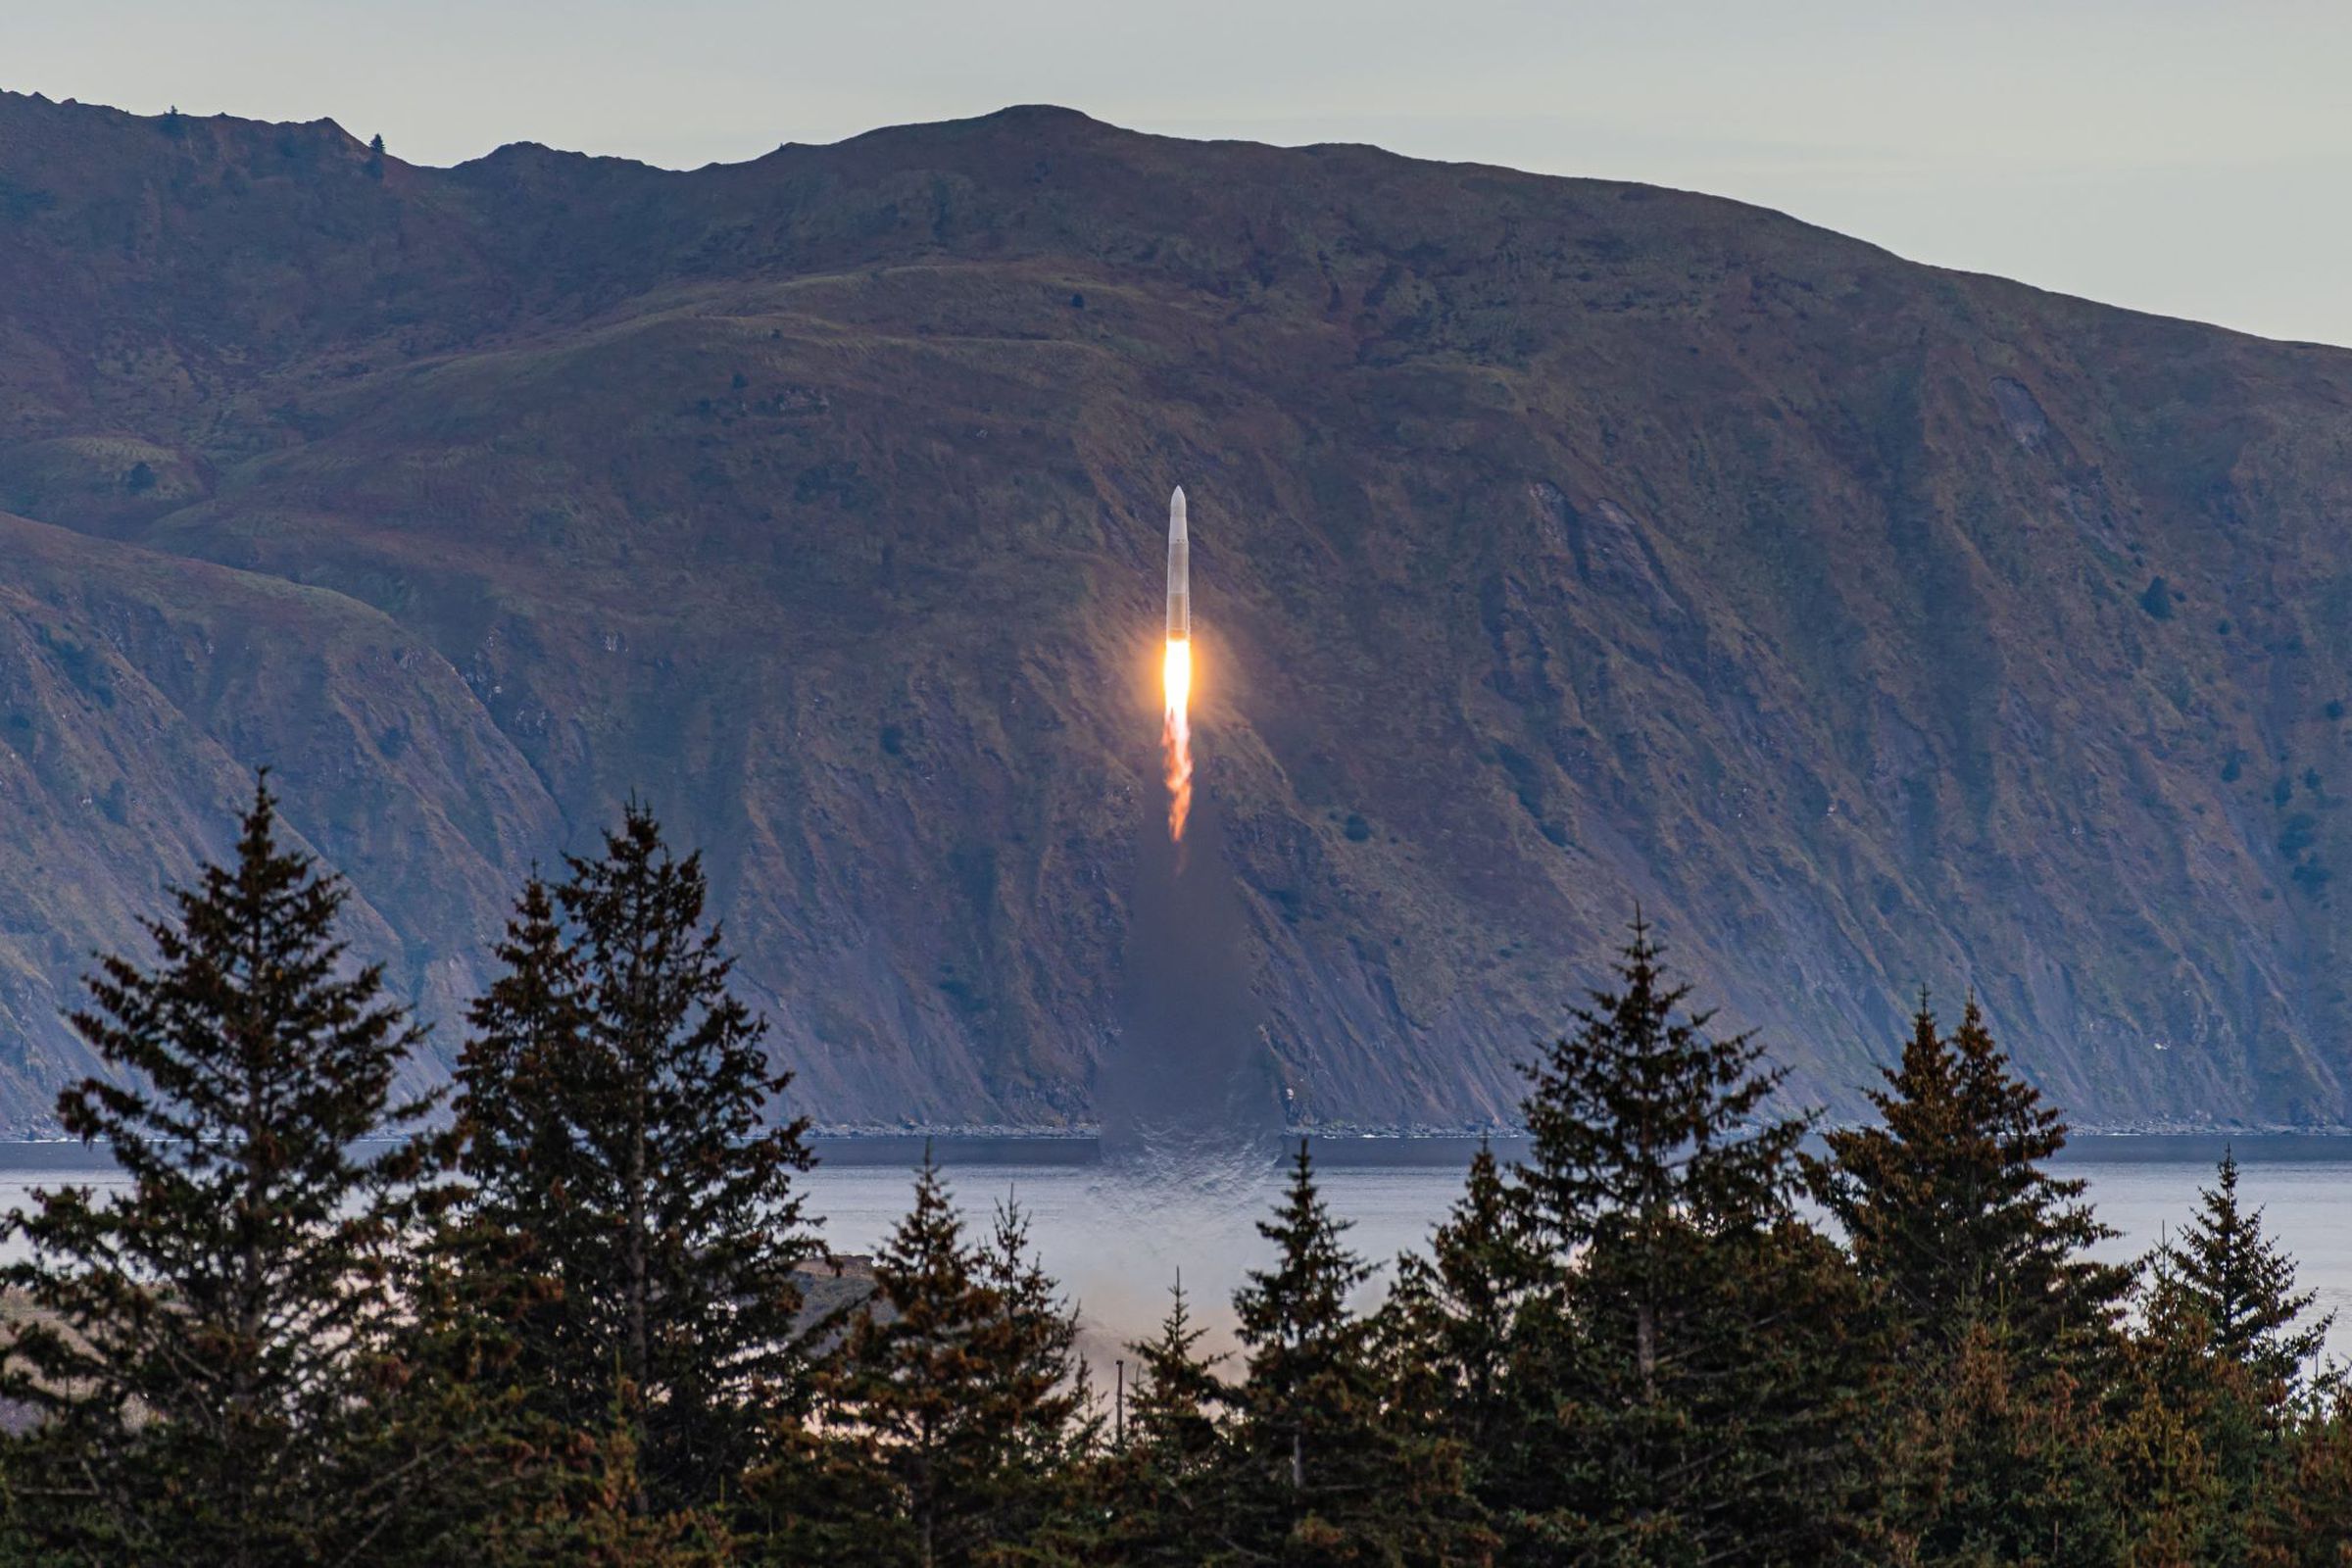 The first of a series of three Astra rocket iterations lifts off in September 2020 from the company’s launch site in Kodiak, Alaska.